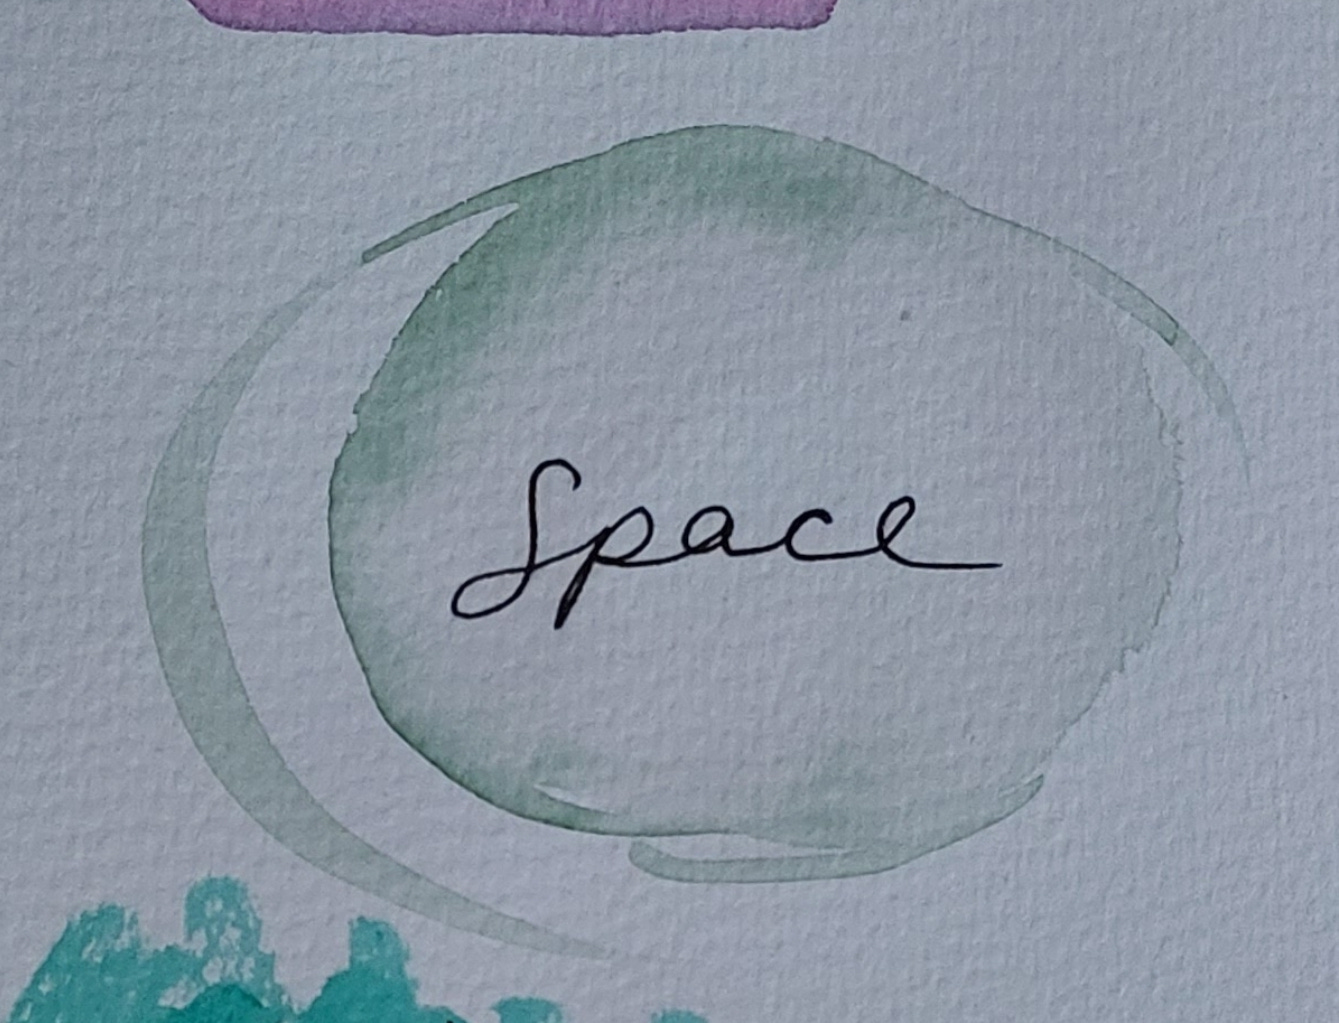 Space in a light green watercolour oval